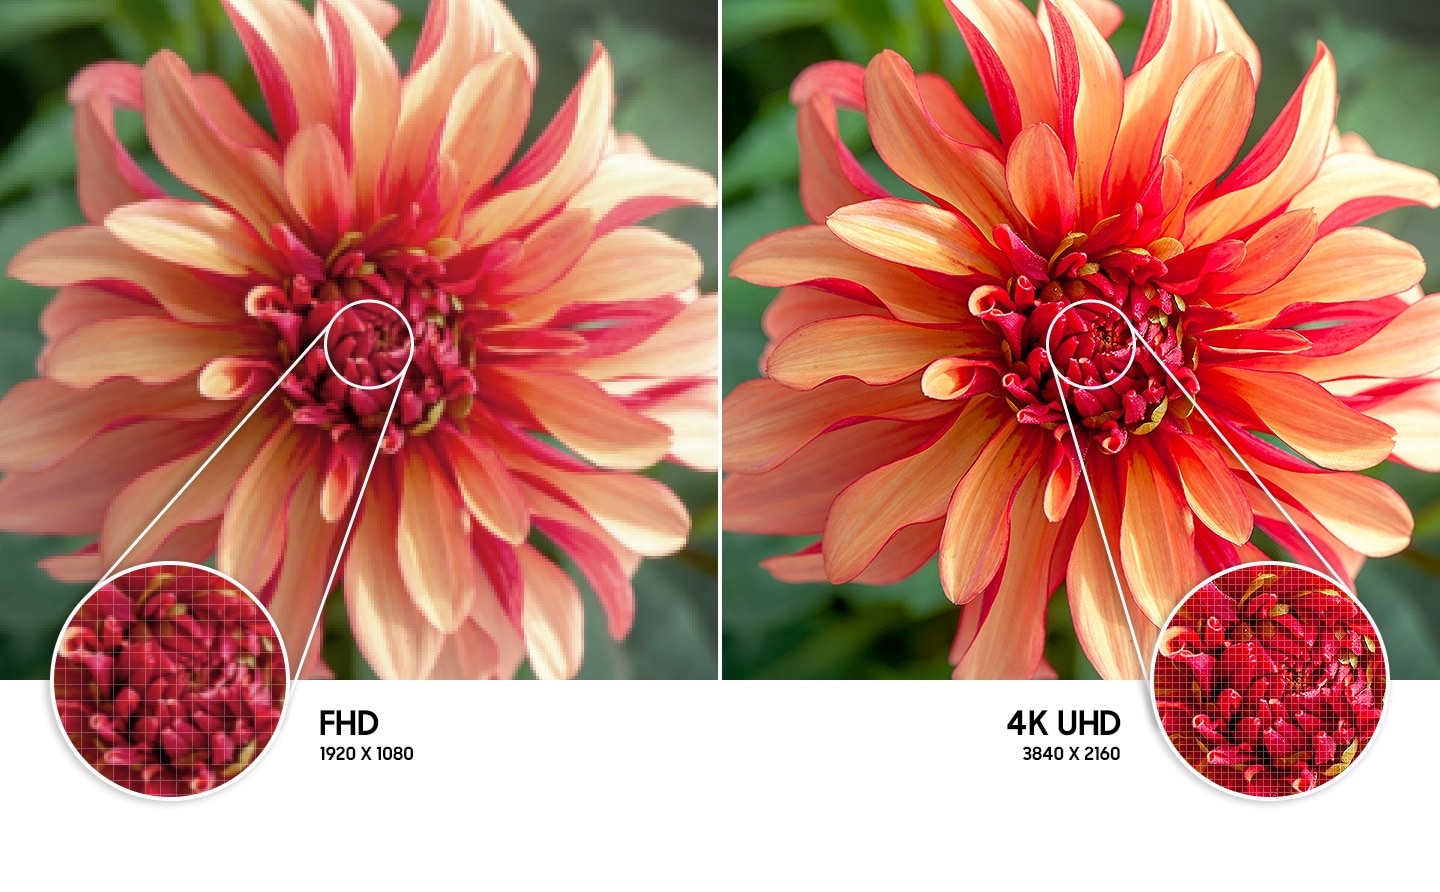 tw feature feel the reality of 4k uhd resolution 425589159